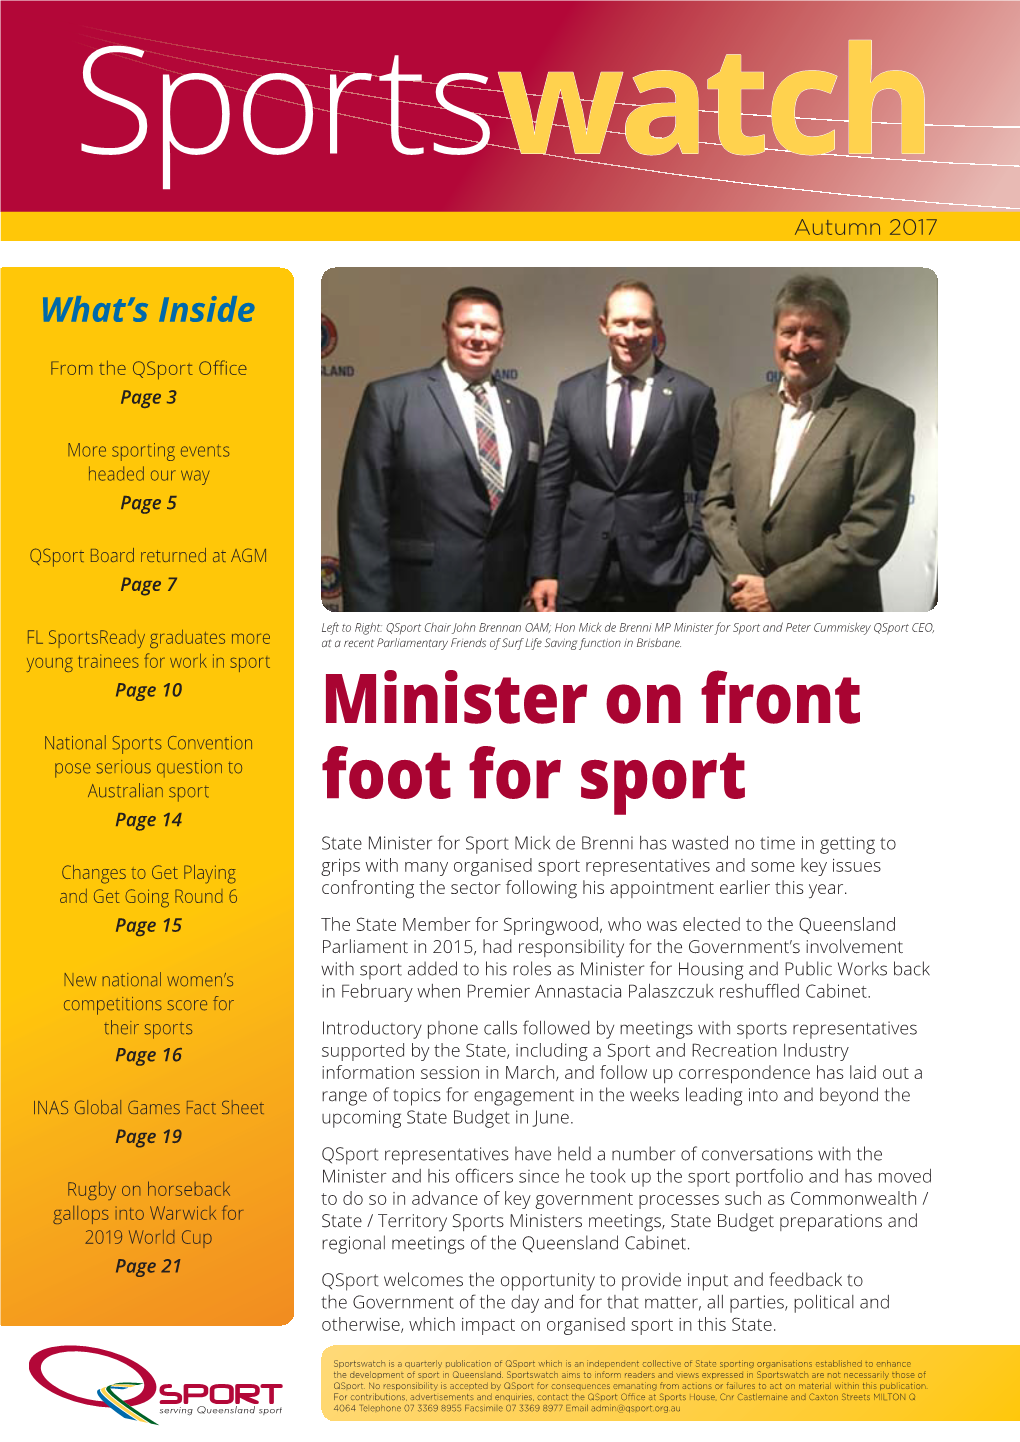 Minister on Front Foot for Sport